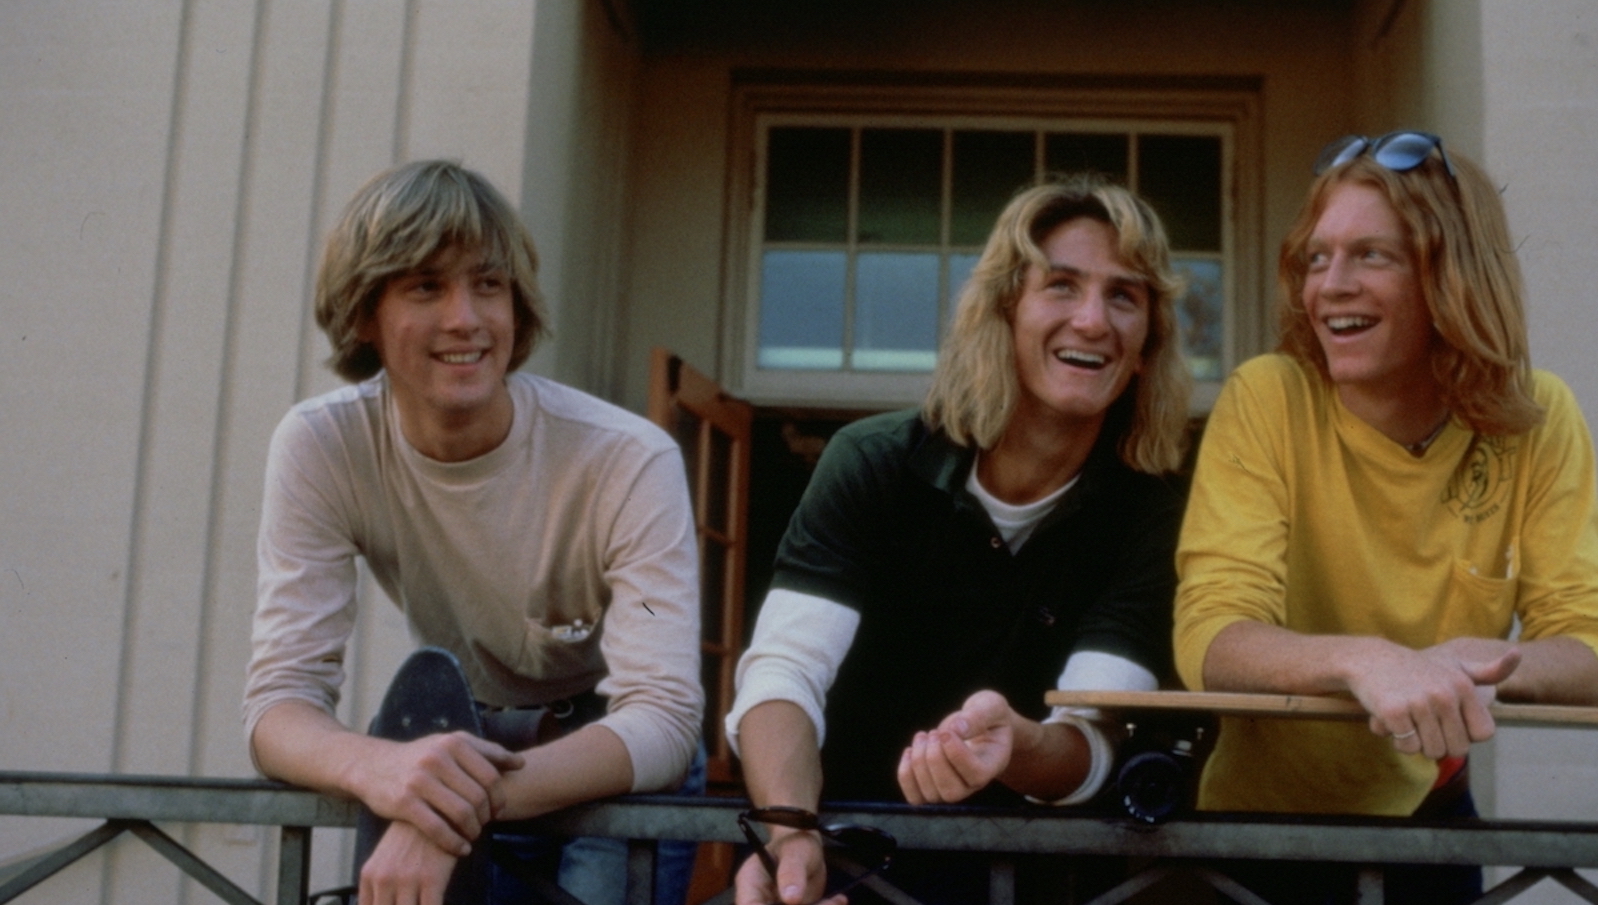 A trio of high school boys on a balcony with long blonde or red hair laugh pleasantly.